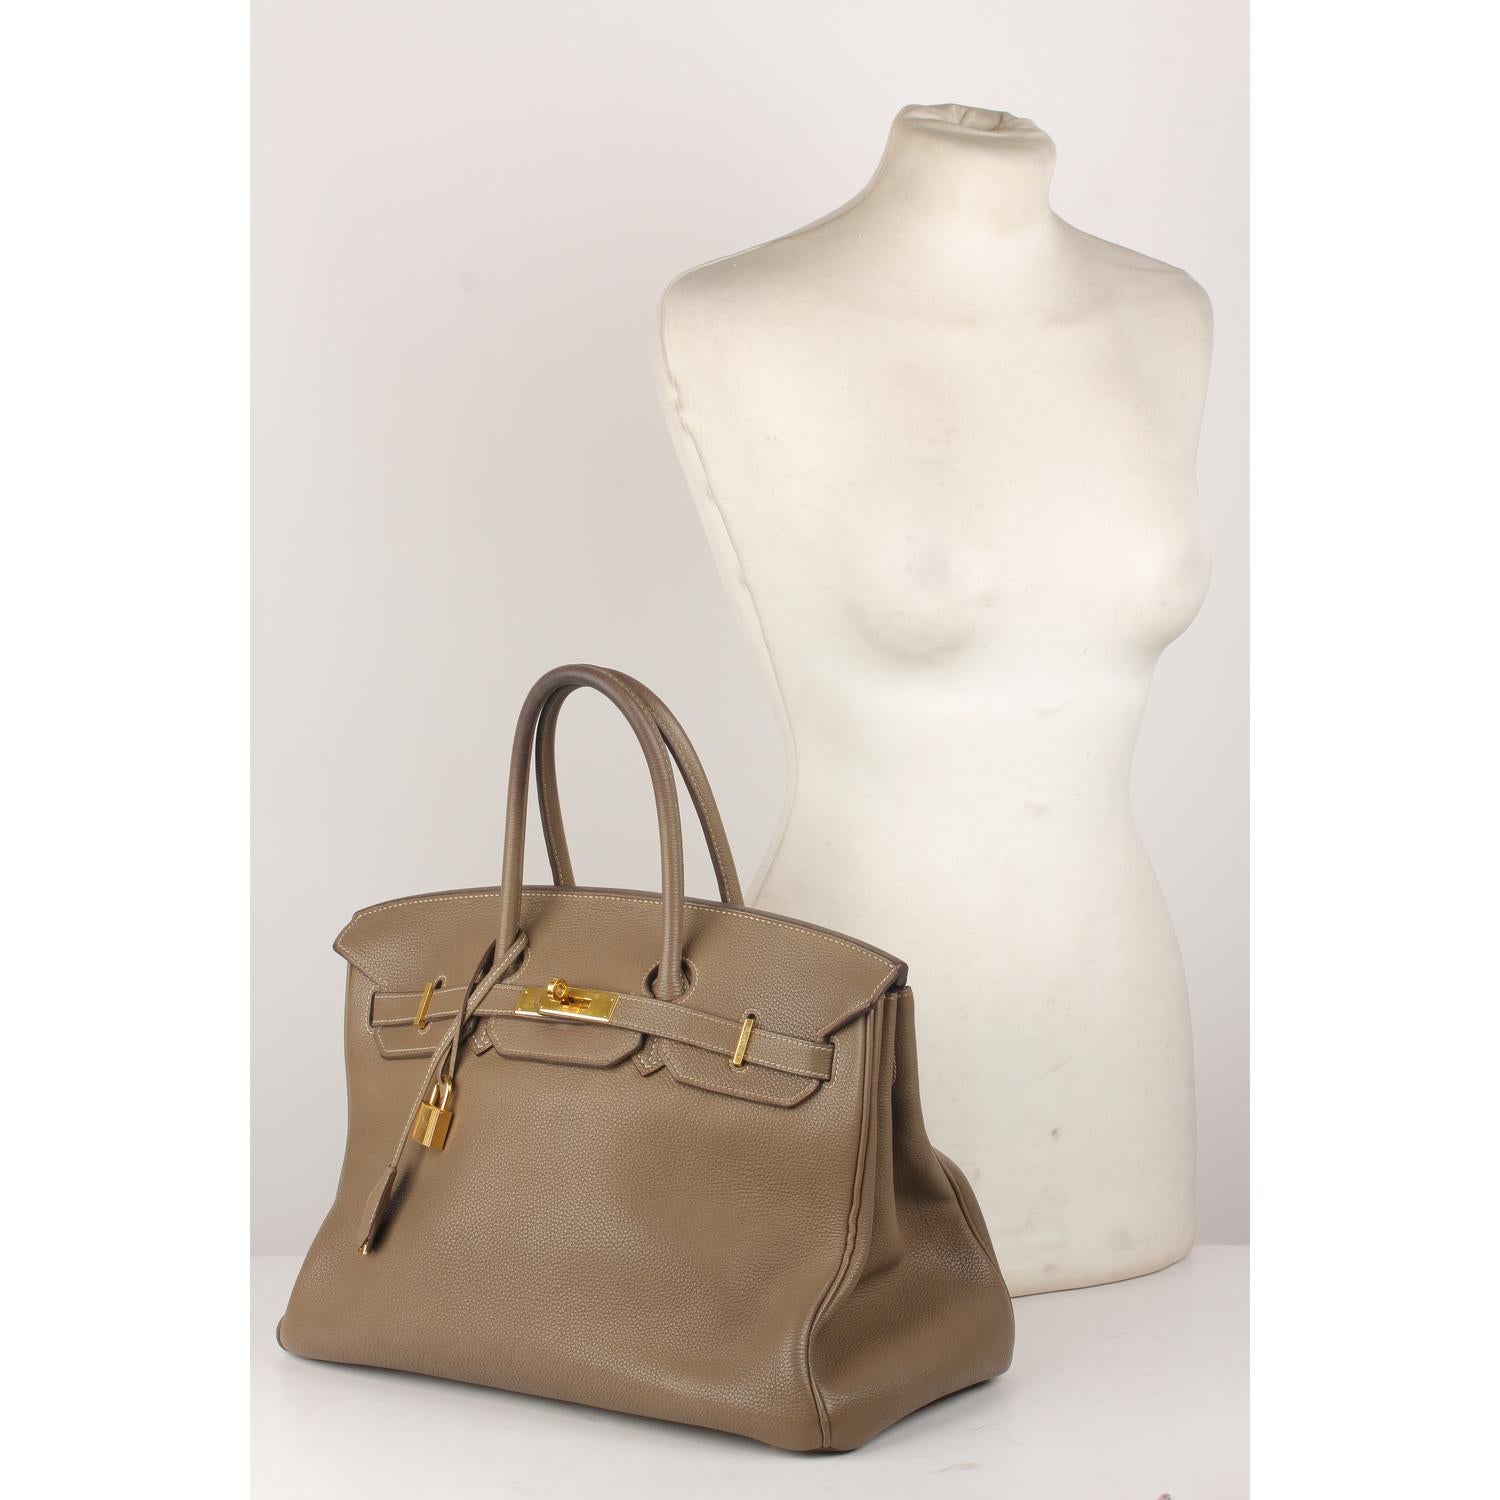 Hermes Taupe Togo Leather Birkin 35 Top Handle Bag Satchel In Good Condition In Rome, Rome